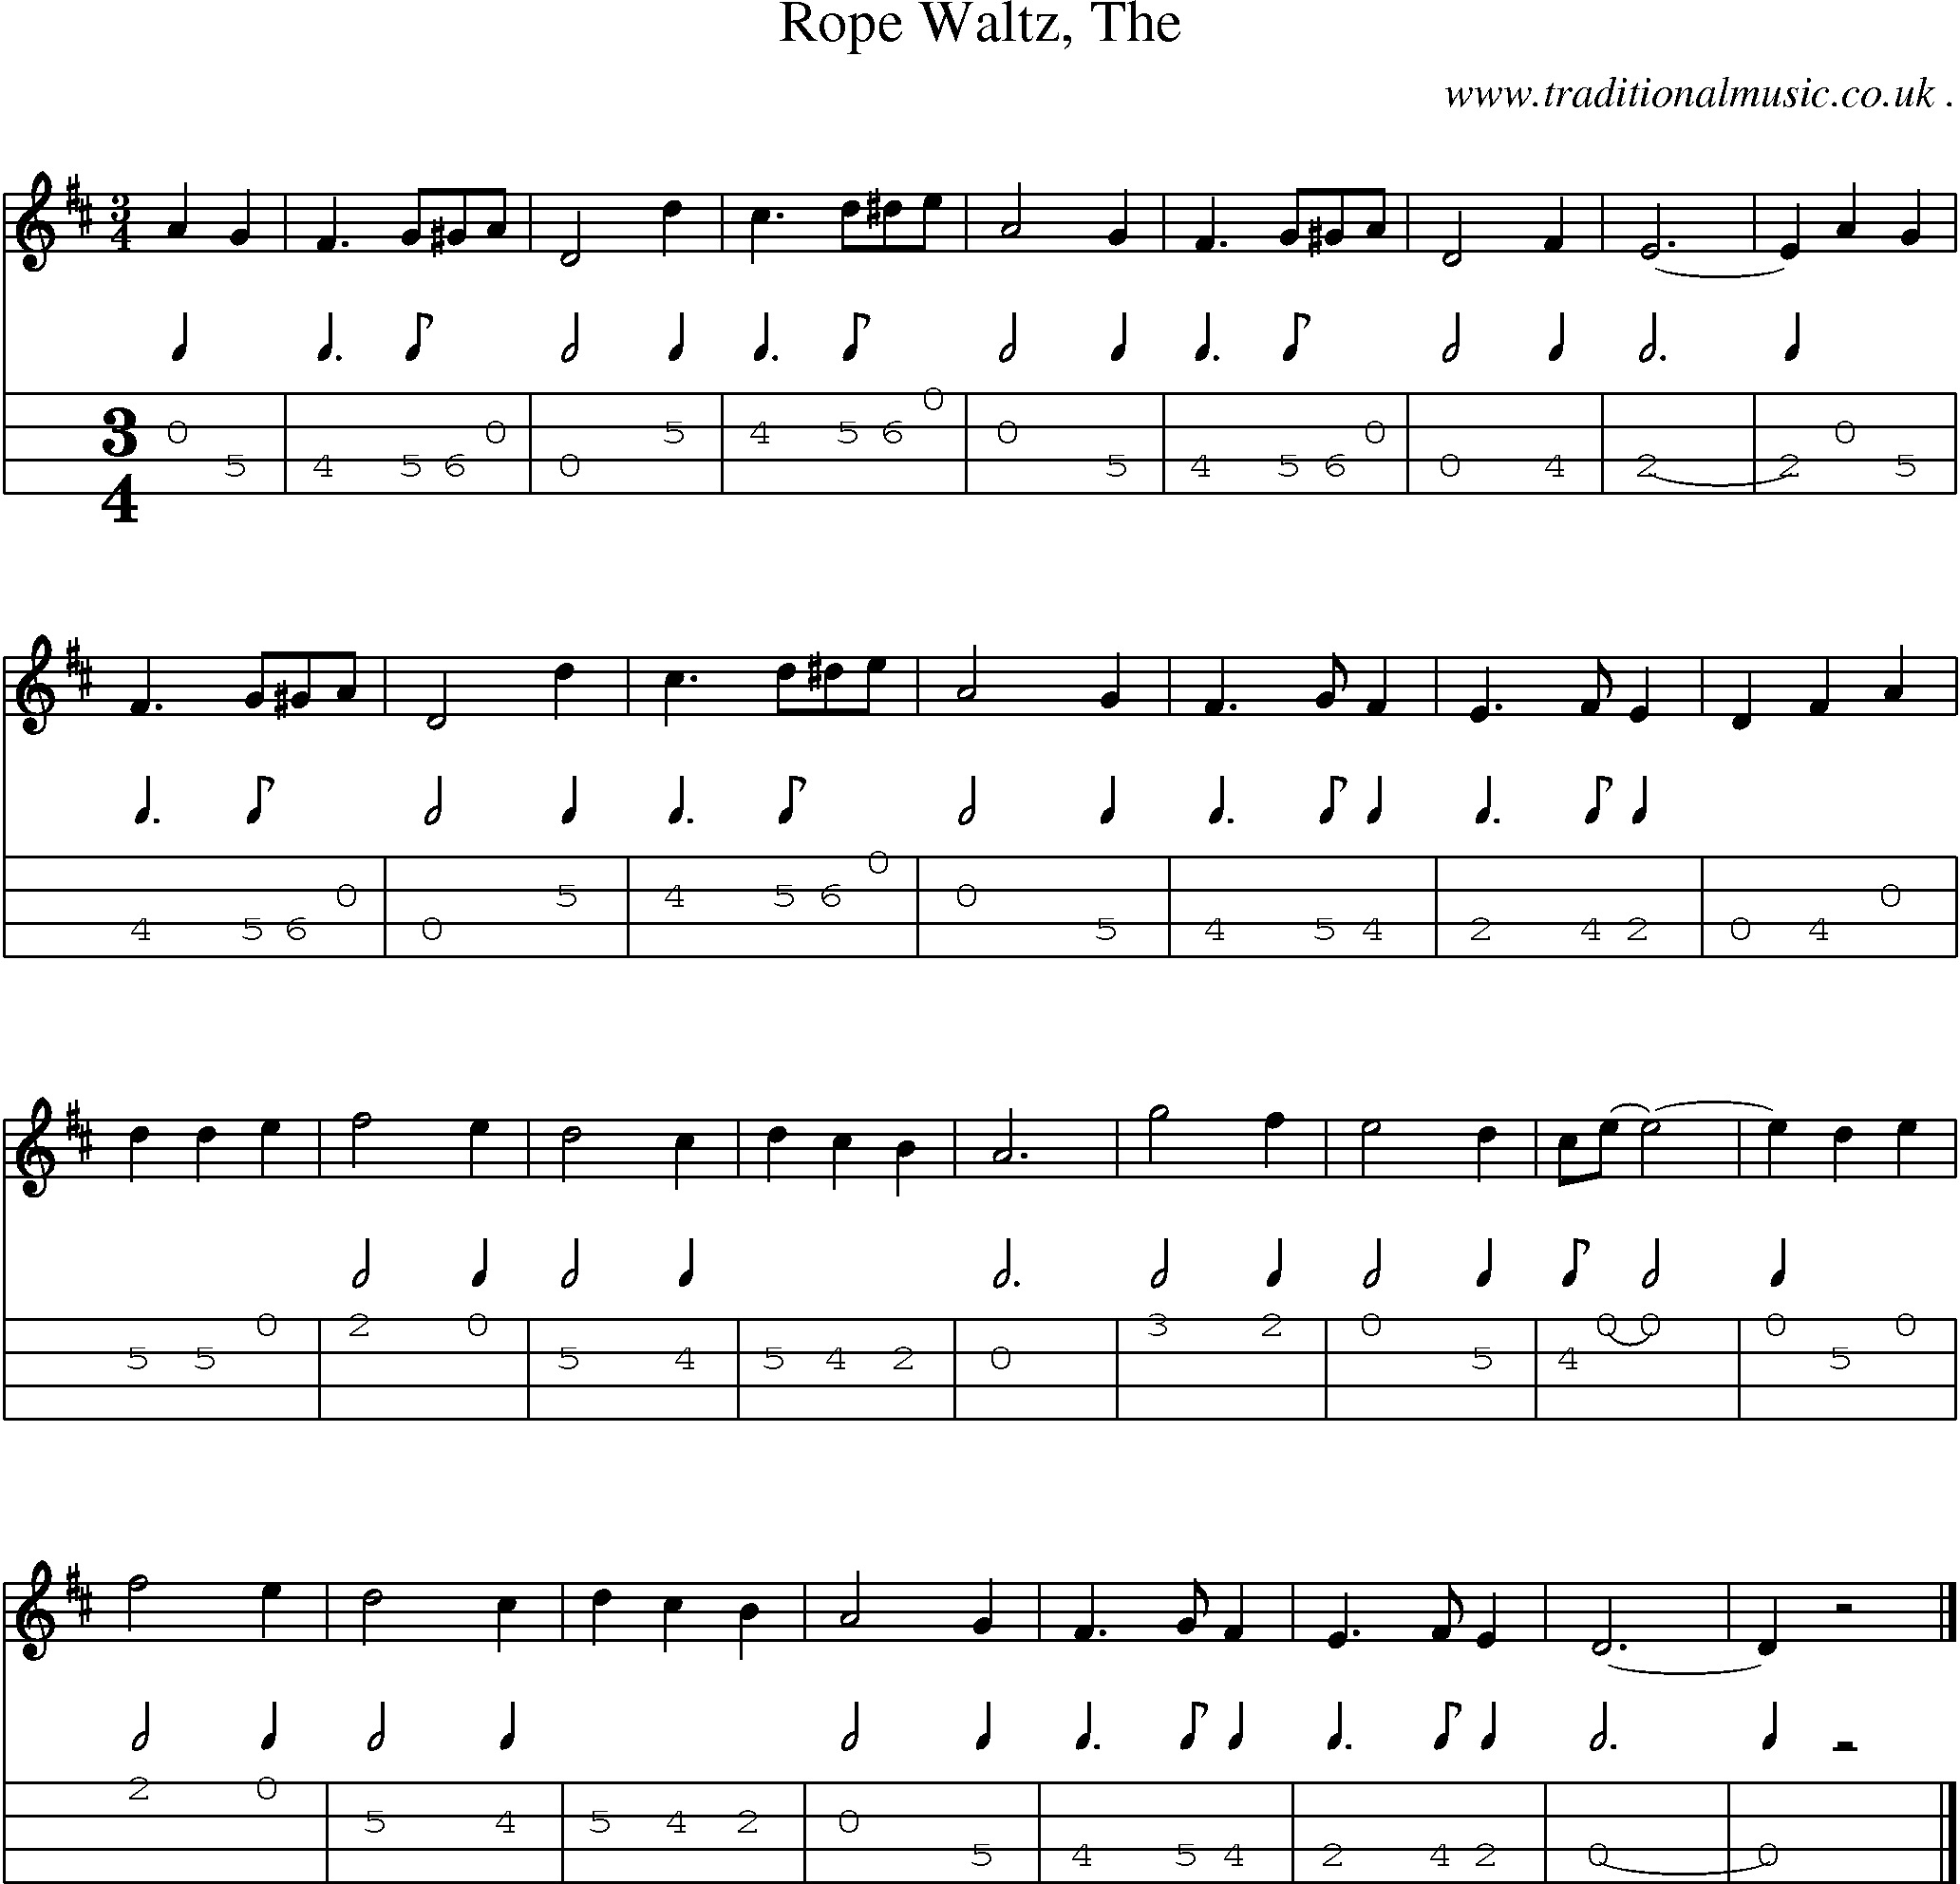 Sheet-music  score, Chords and Mandolin Tabs for Rope Waltz The